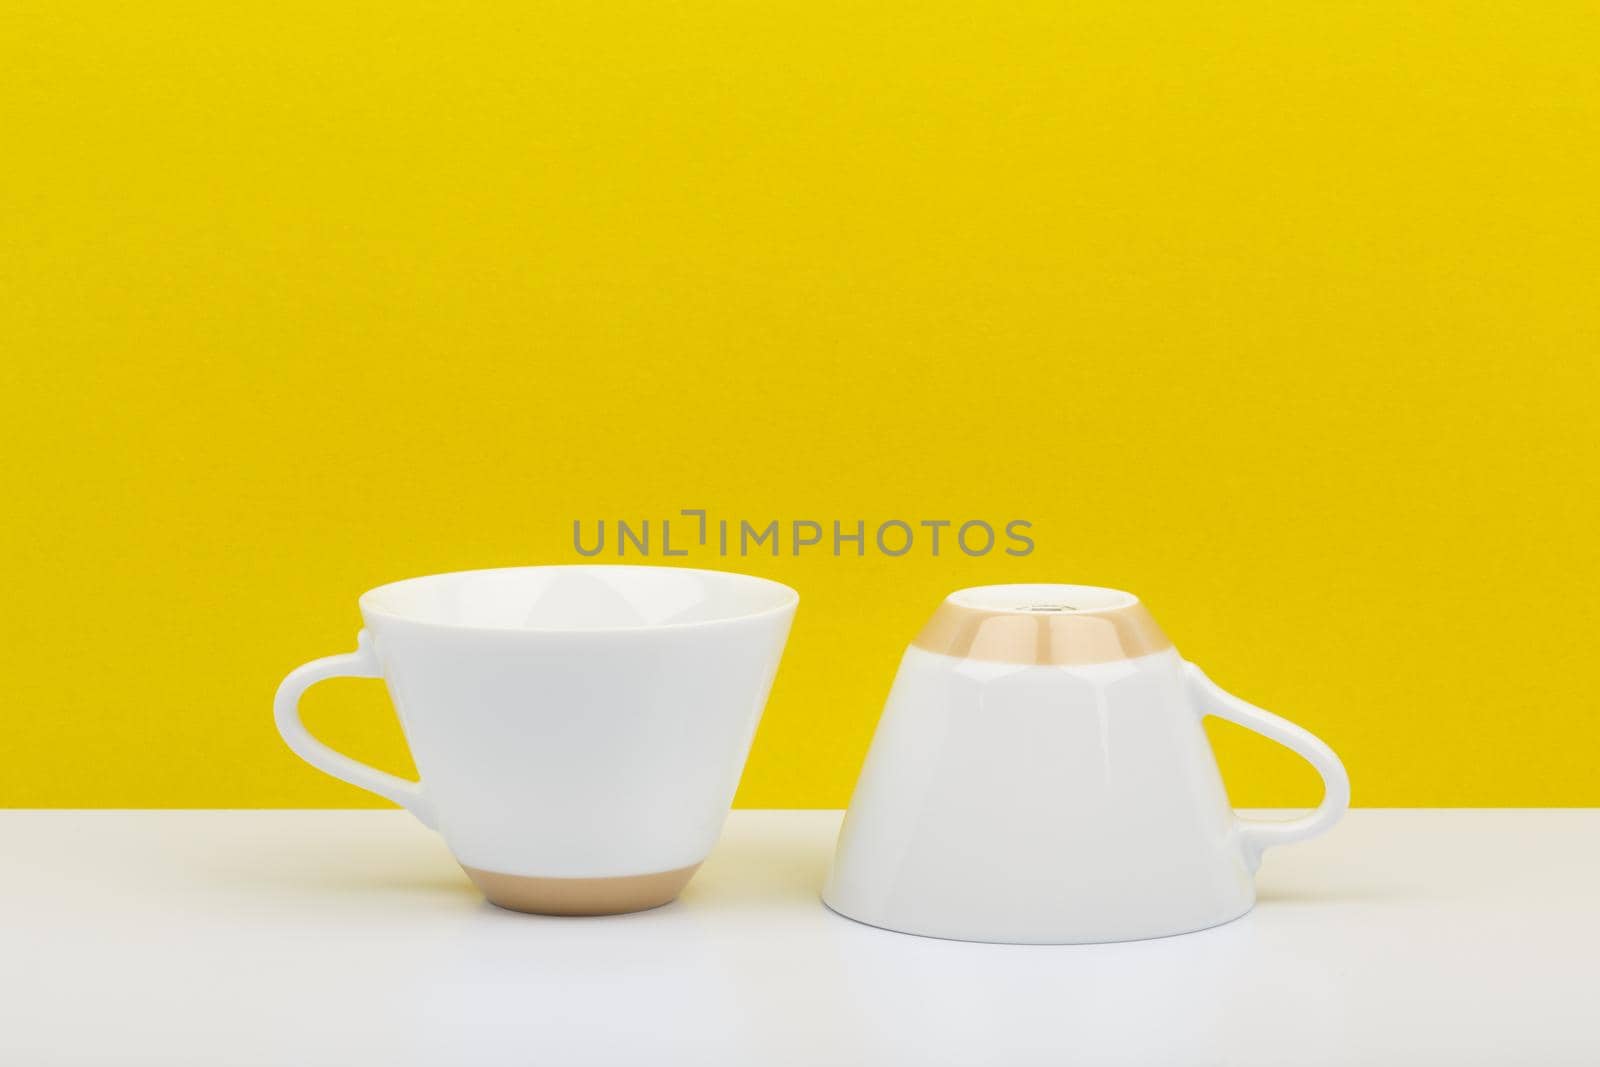 Two white ceramic coffee cups on white table against bright yellow background with space for text by Senorina_Irina